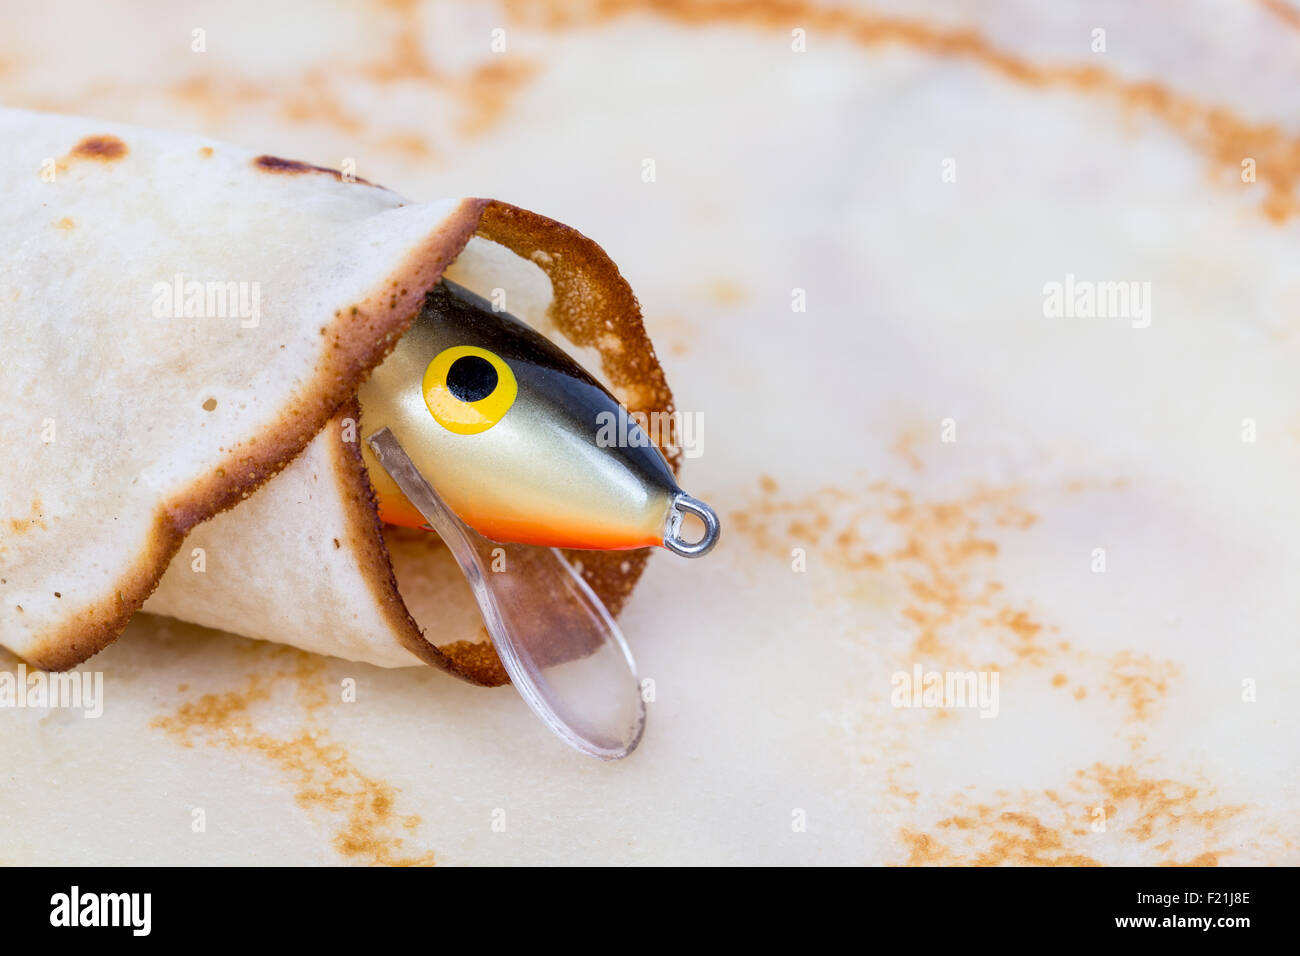 front a fishing tackle lure rolled in pancake Stock Photo